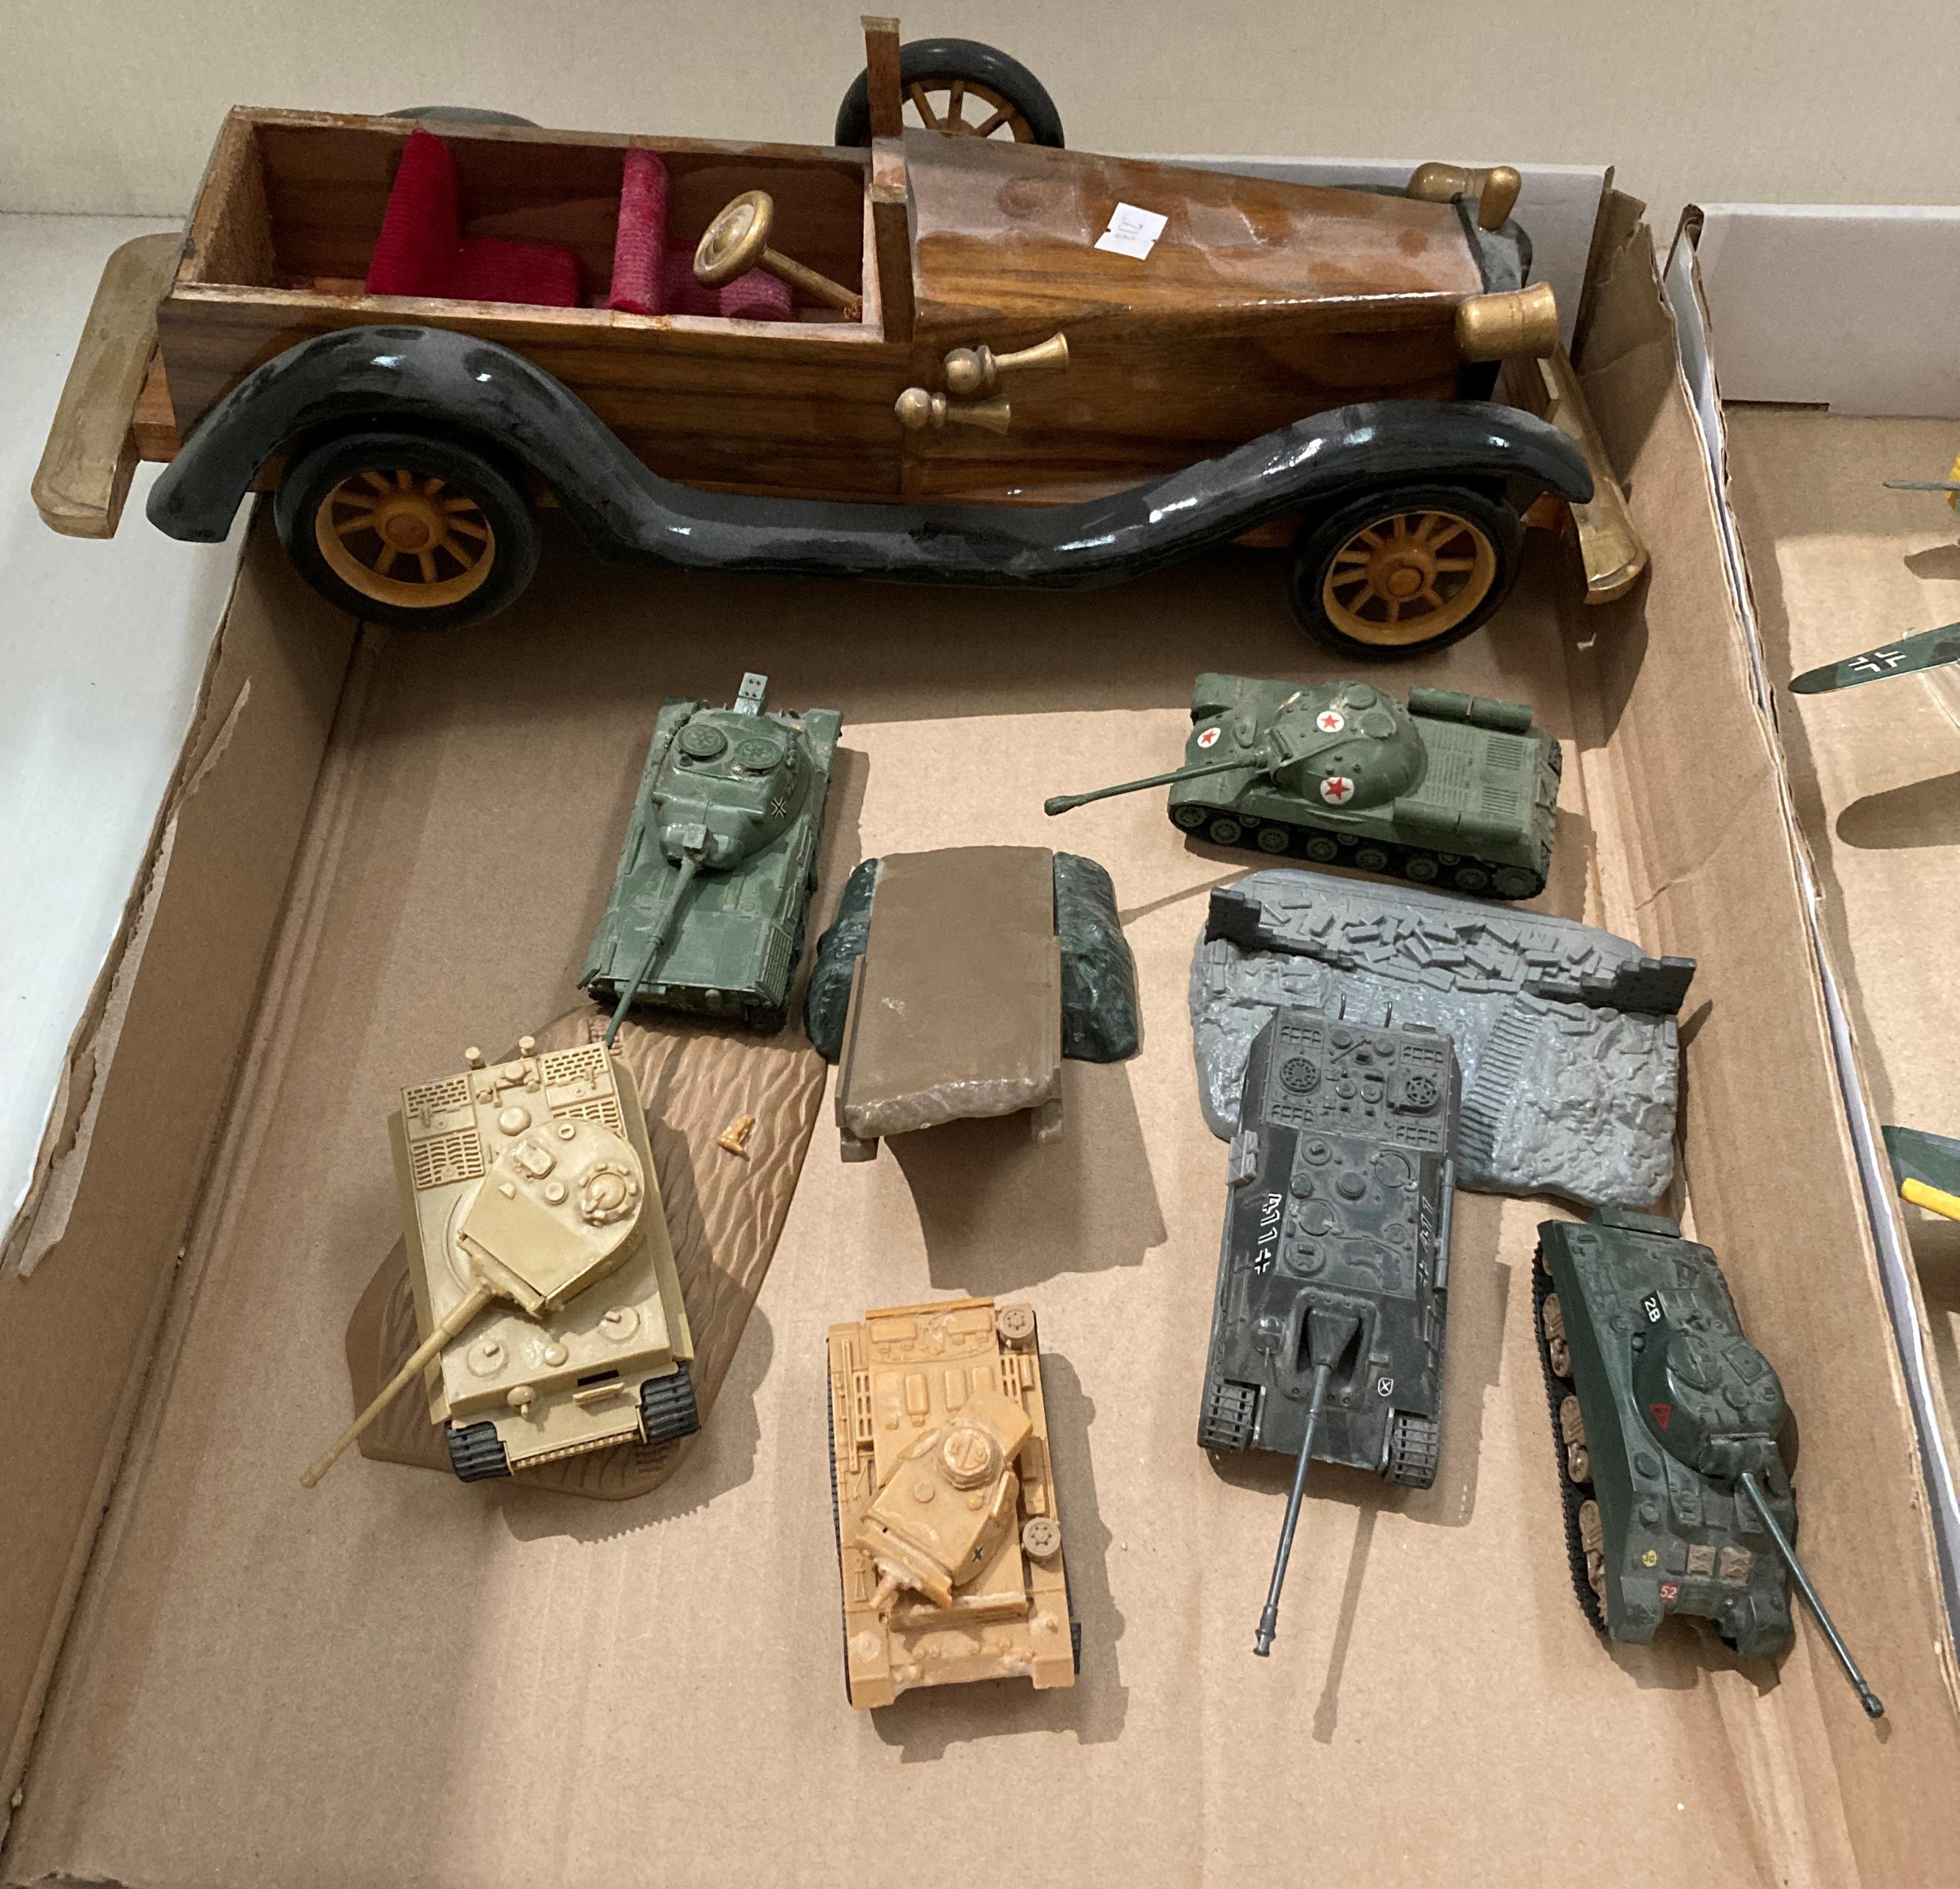 Contents to two trays - six assorted model plastic tanks, a wooden model car, - Image 2 of 3